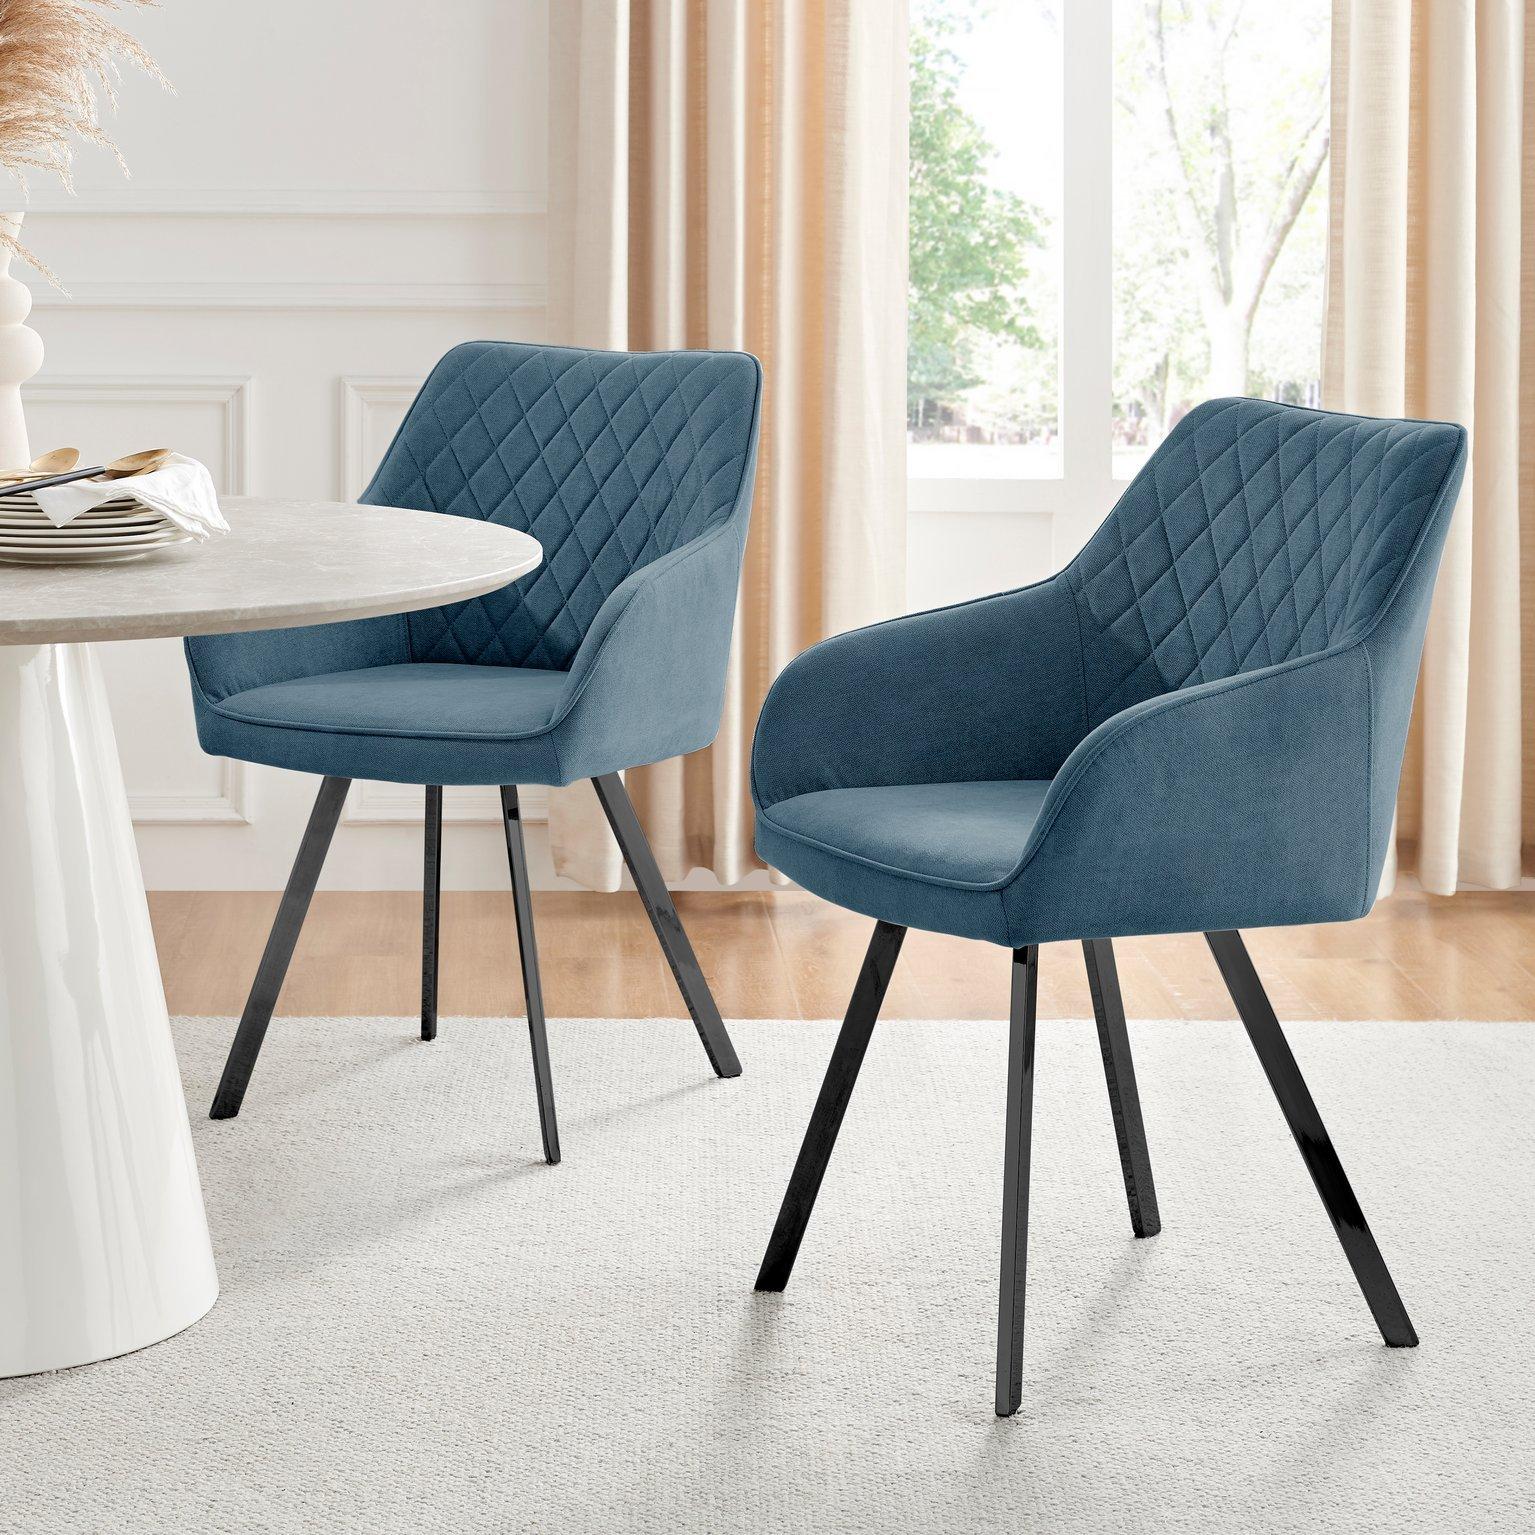 Set of 2 Falun Deep Padded Dining Chairs Upholstered in Soft & Durable Fabric With Black Legs